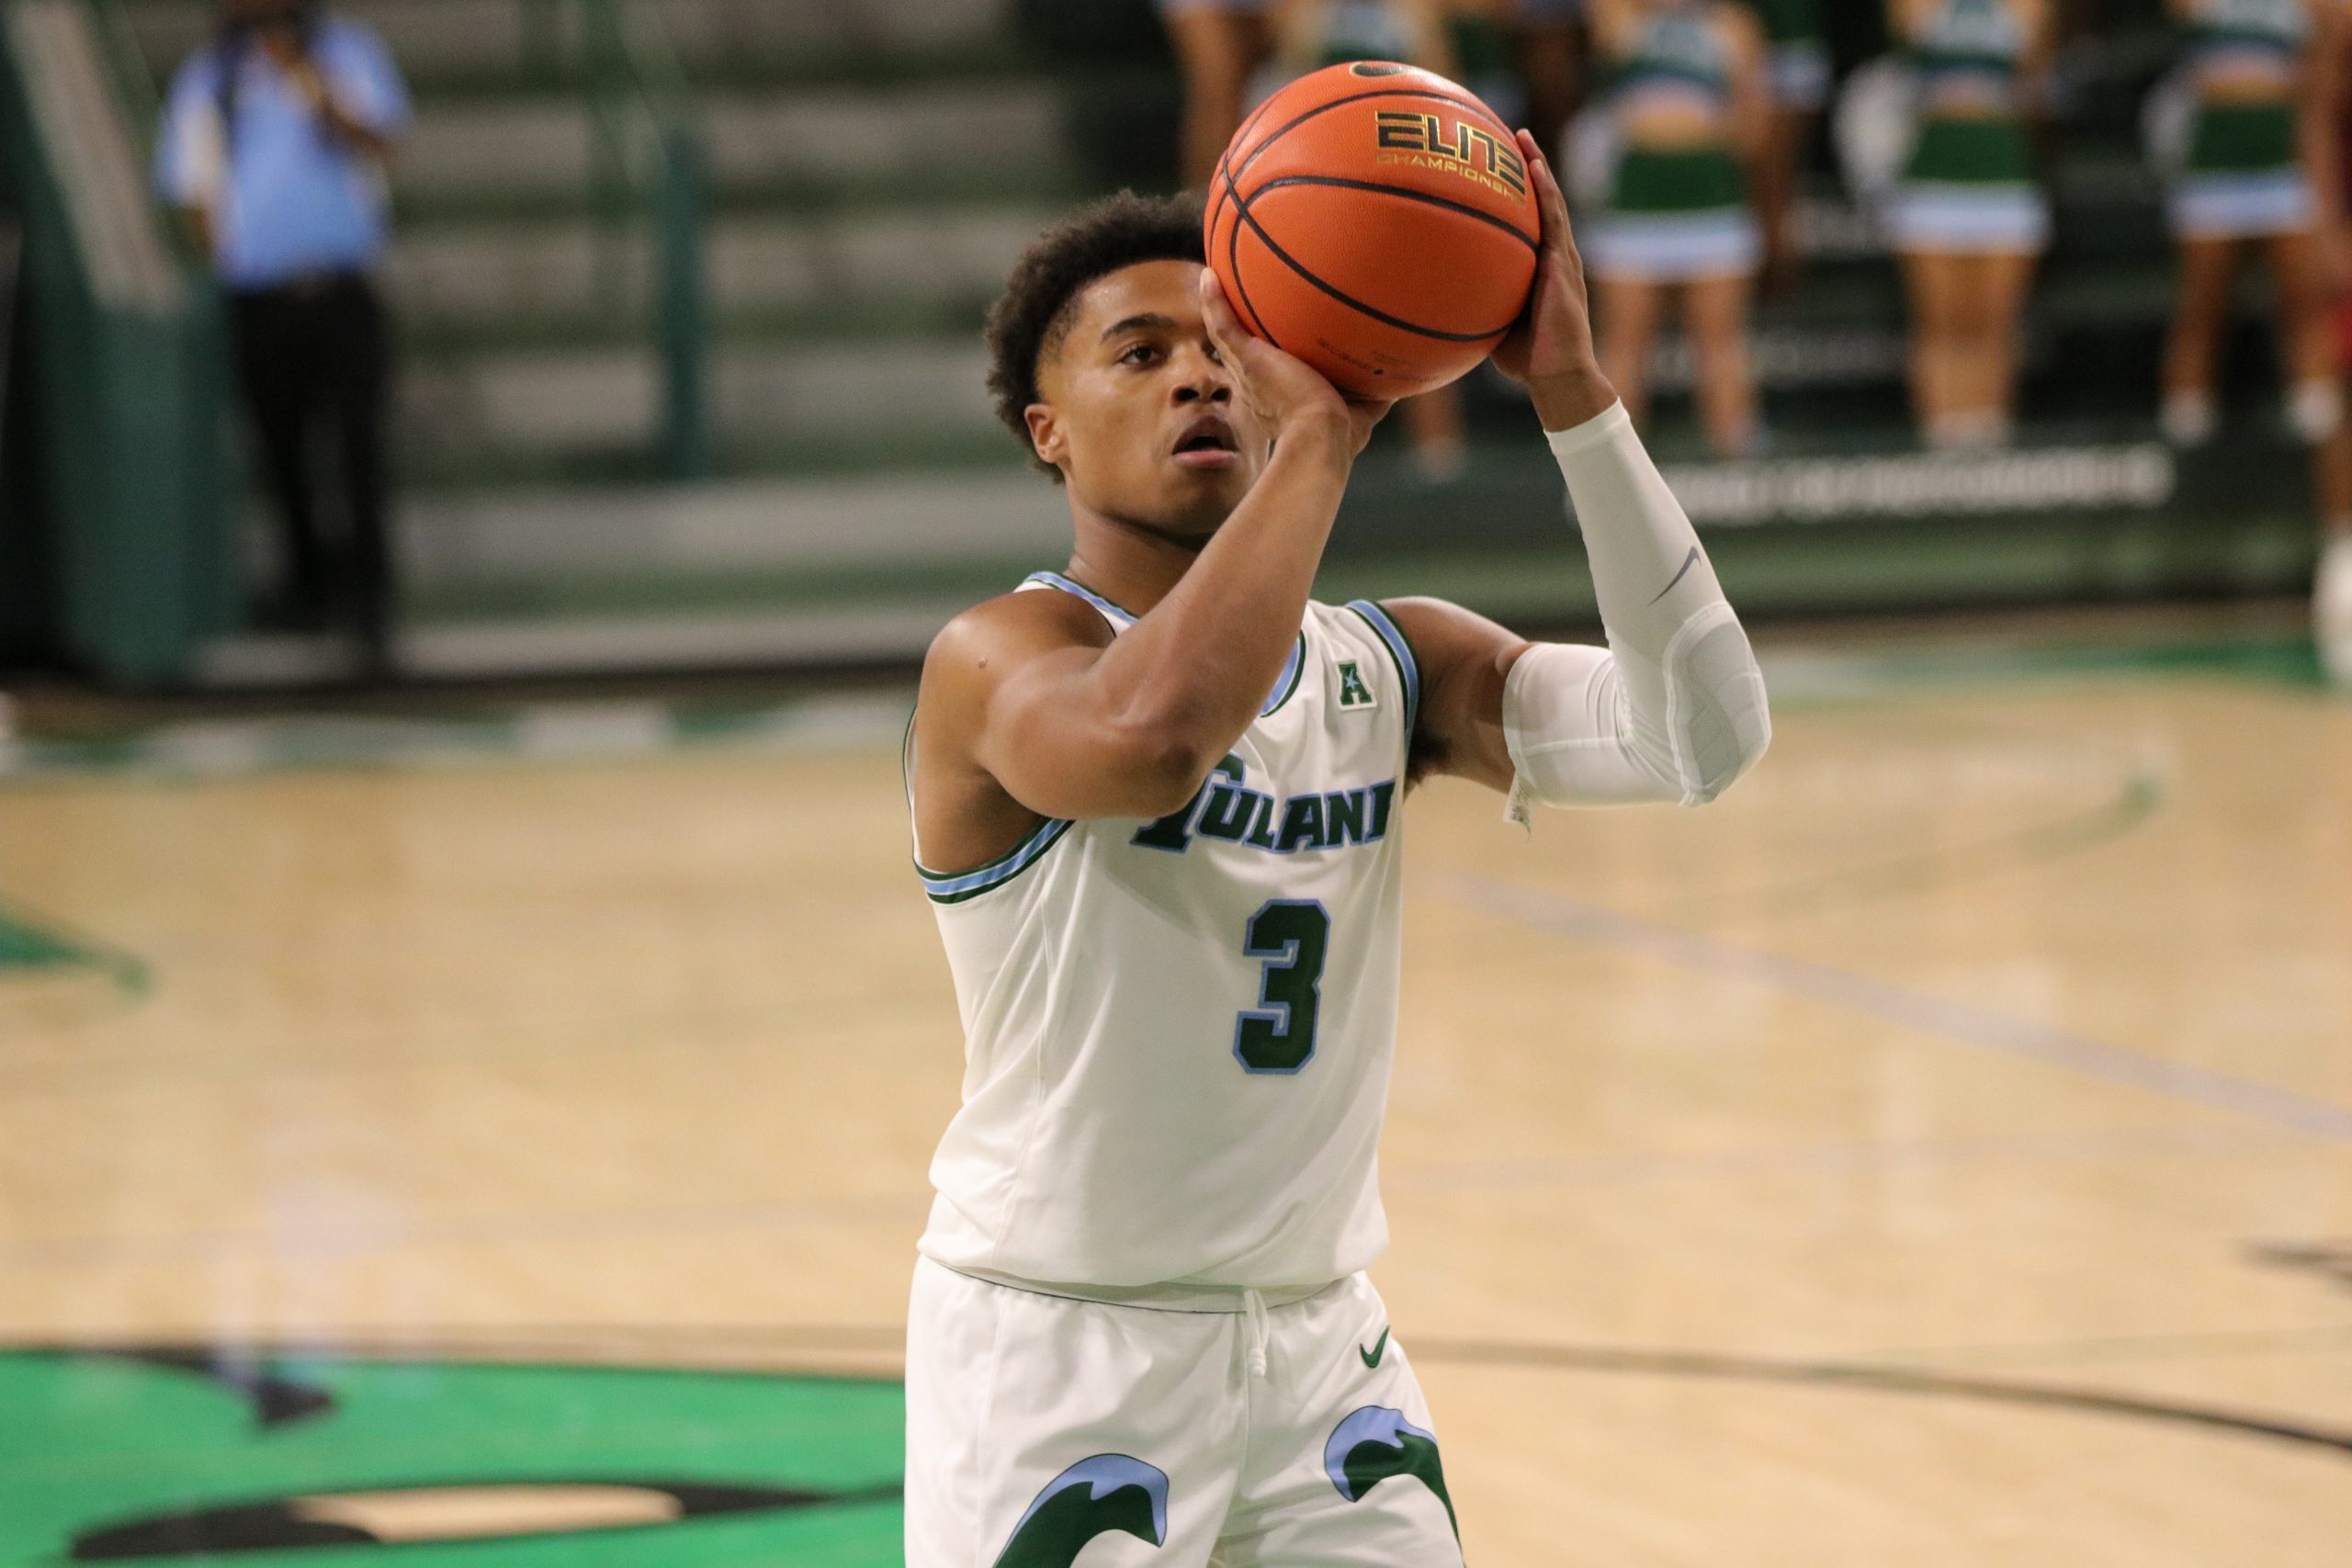 Are Tulane Basketball Games Fun for Kids?